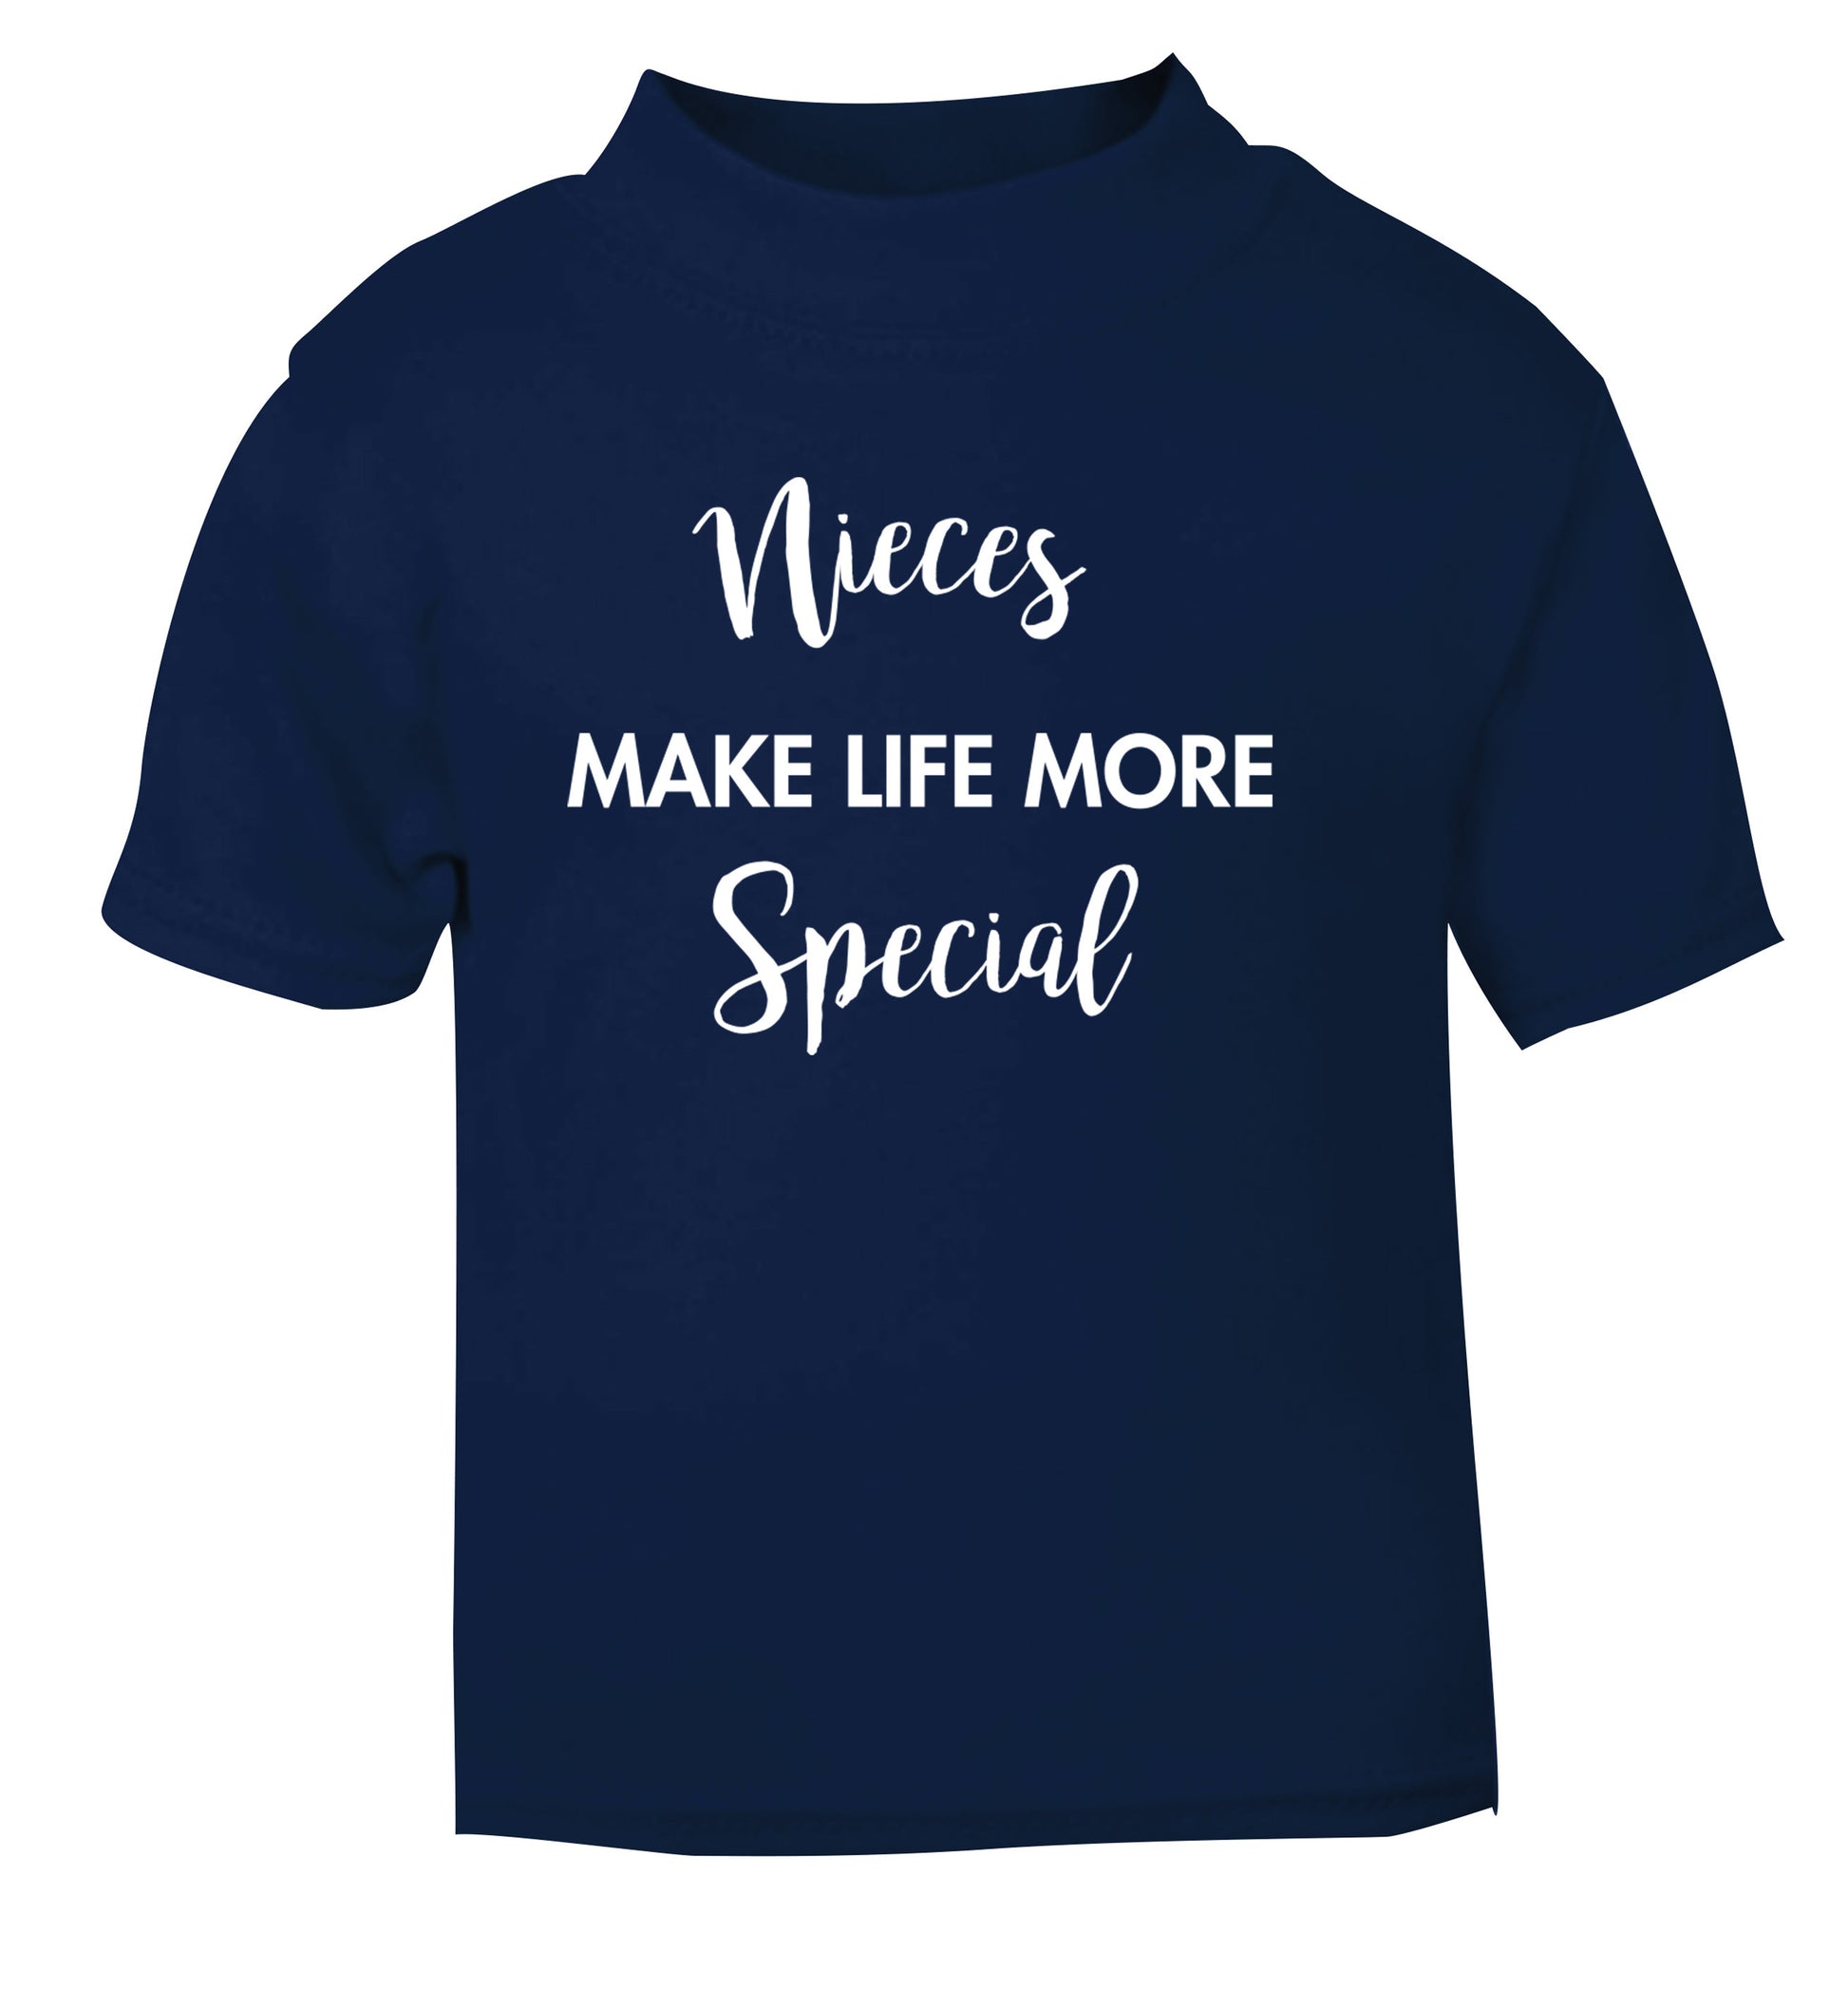 Nieces make life more special navy Baby Toddler Tshirt 2 Years